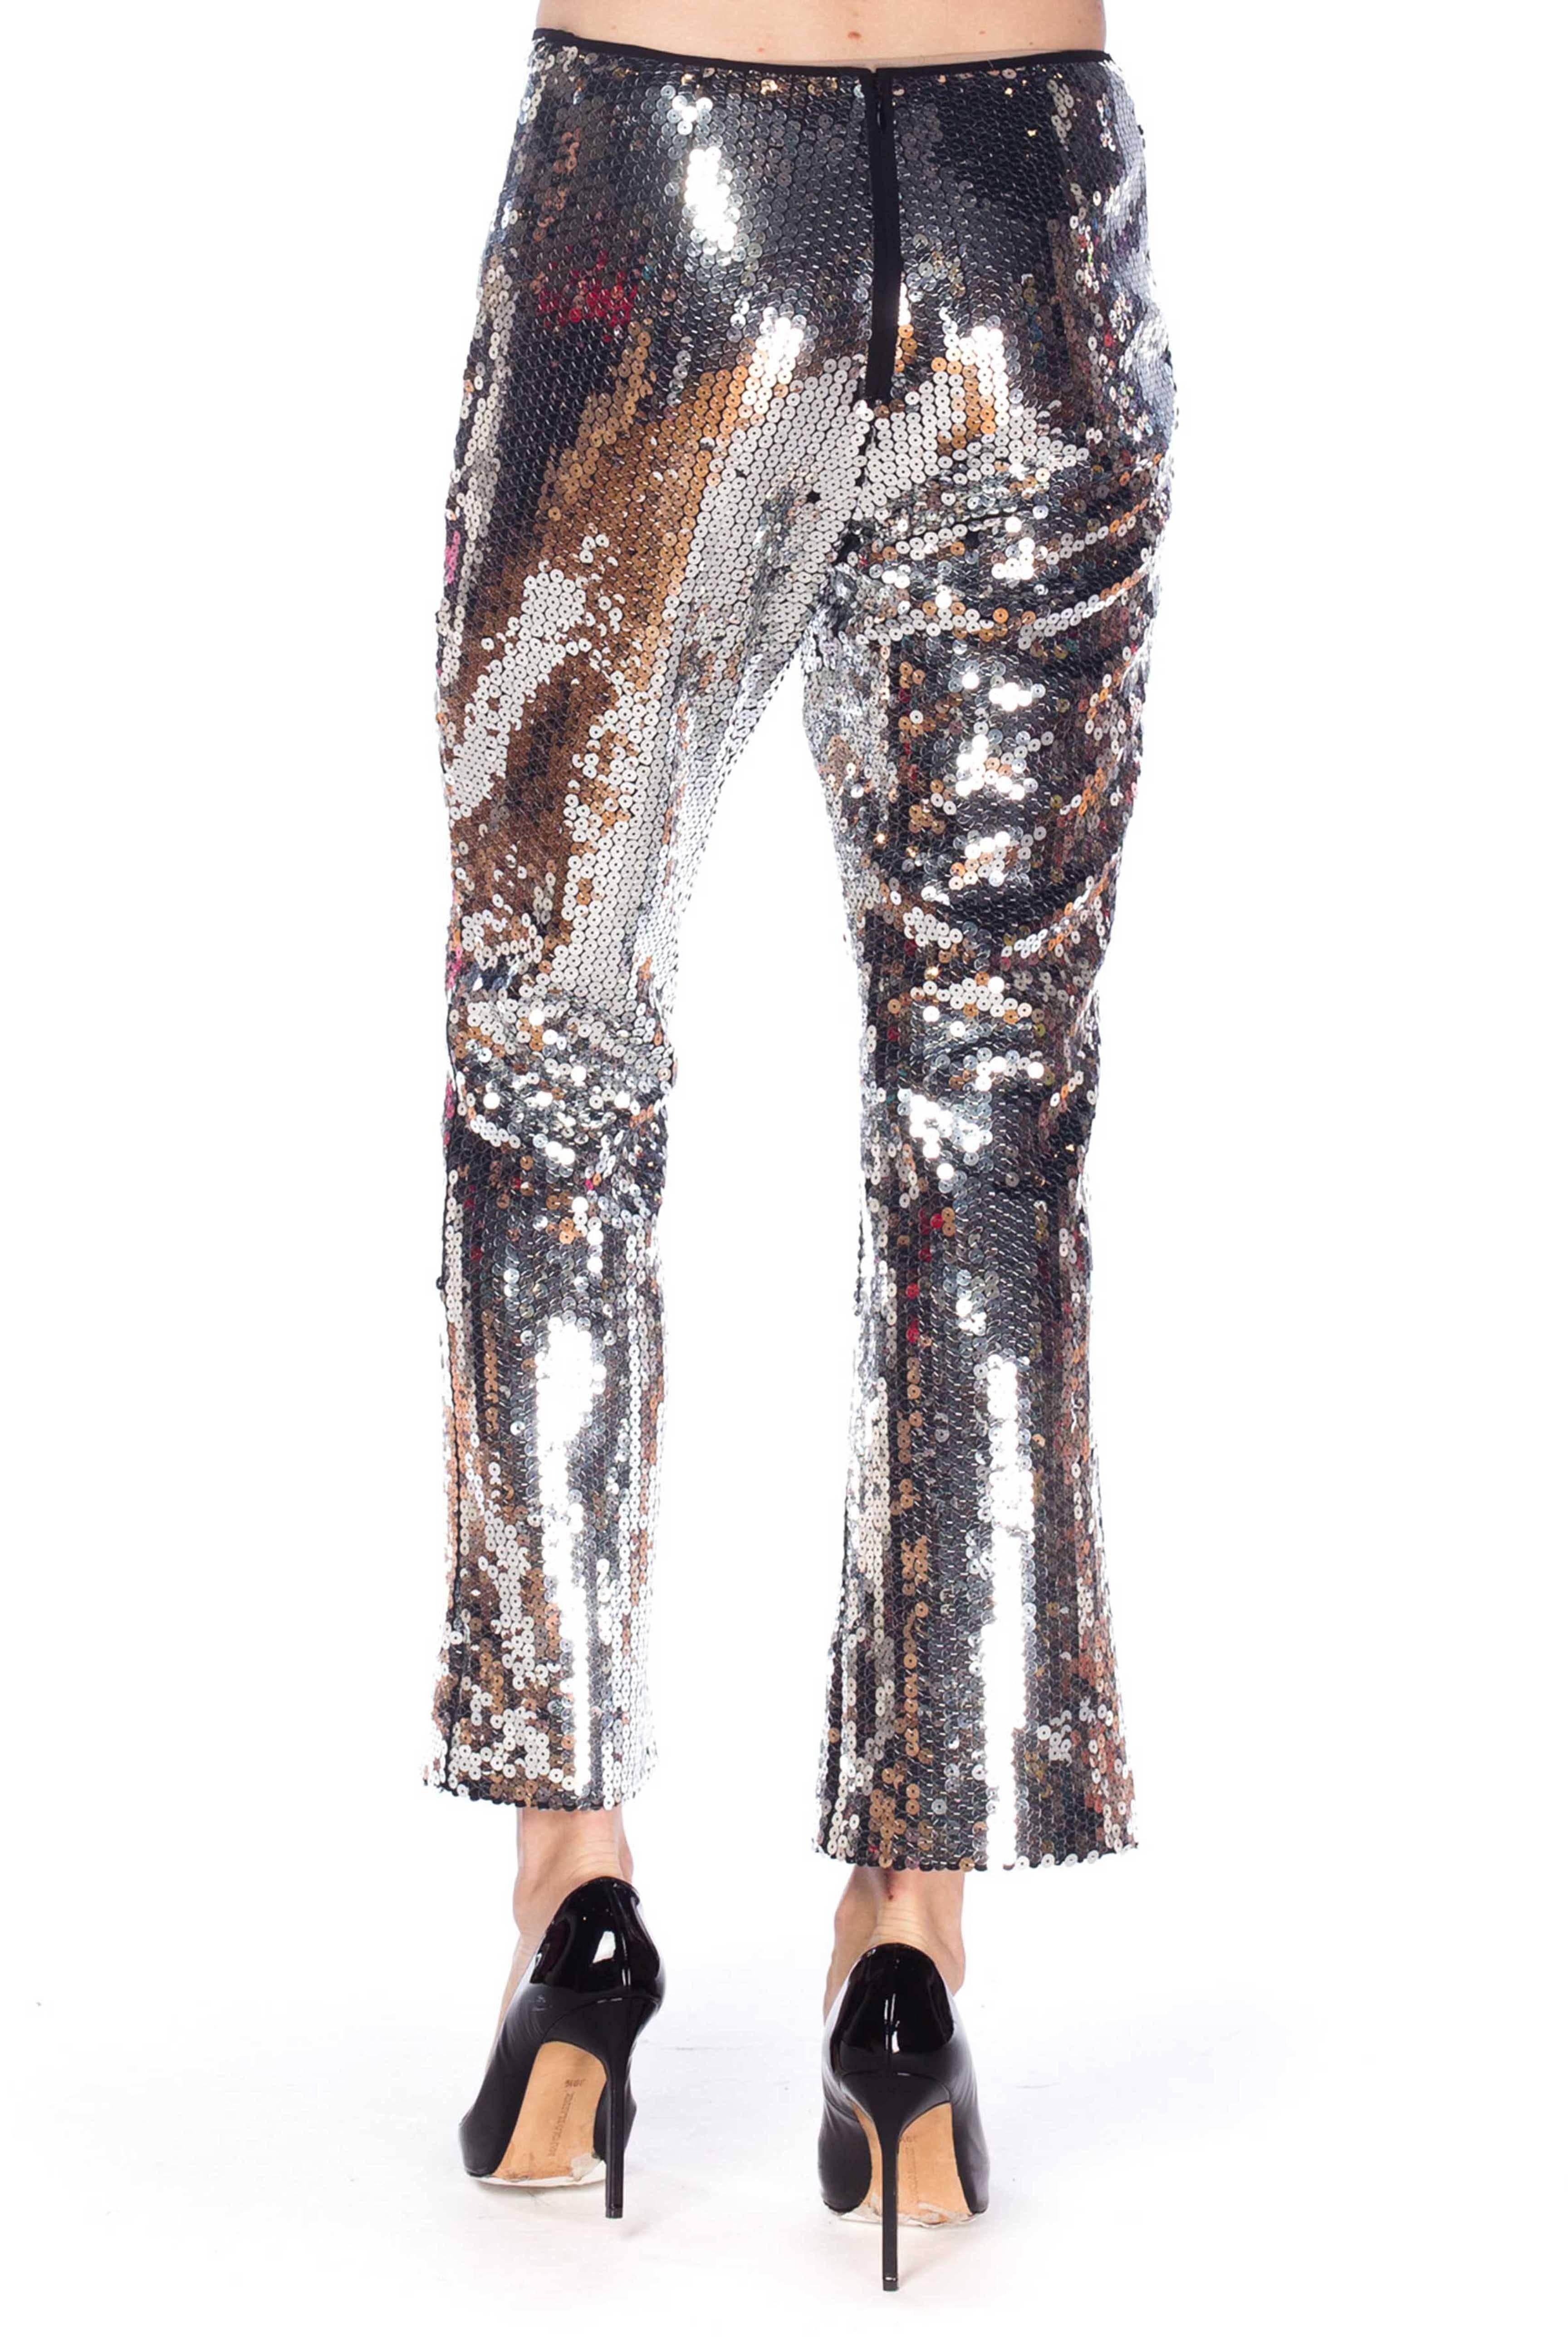 Dolce & Gabbana Silver Metallic Sequined Low-Rise Pants 2